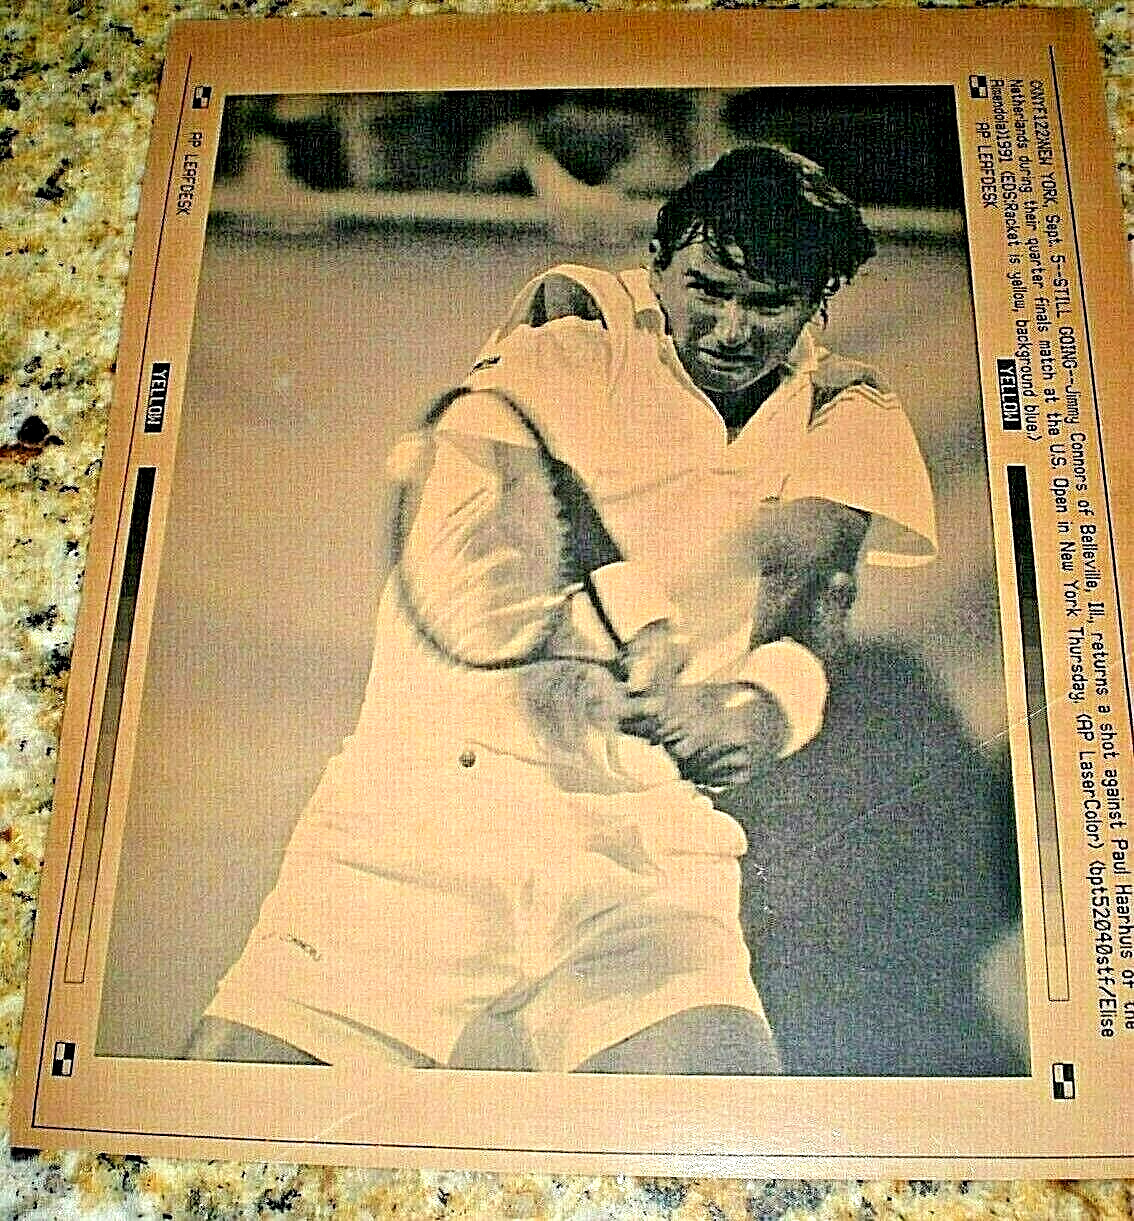 1991 JIMMY CONNORS US OPEN (RARE) AP WIRE PRESS PHOTO NEW YORK QUARTER FINALS